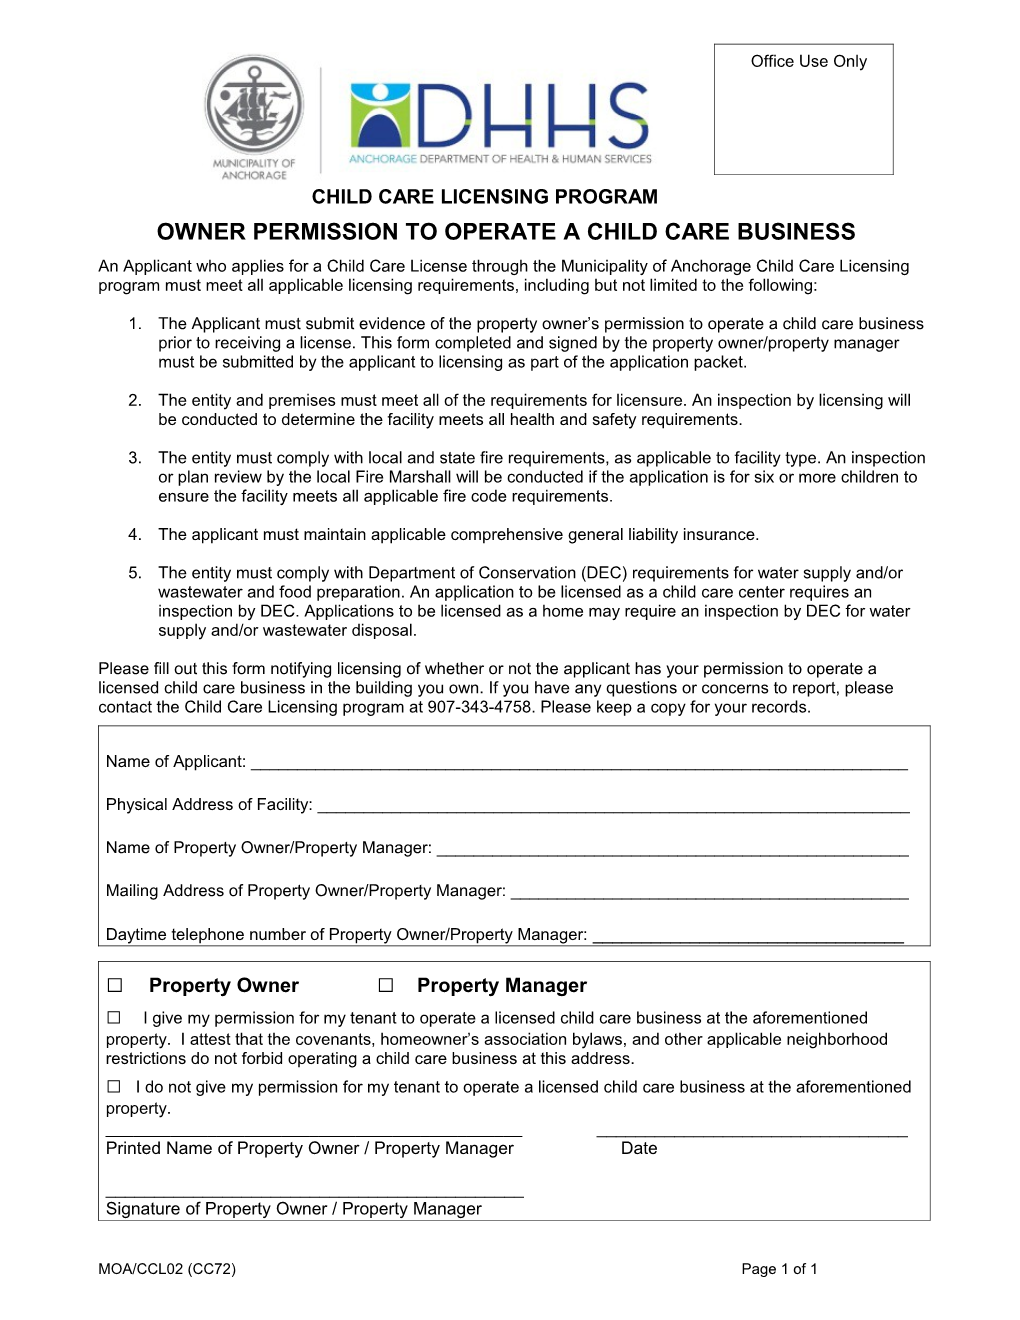 CCL02 Owner Permission to Operate a Child Care Business